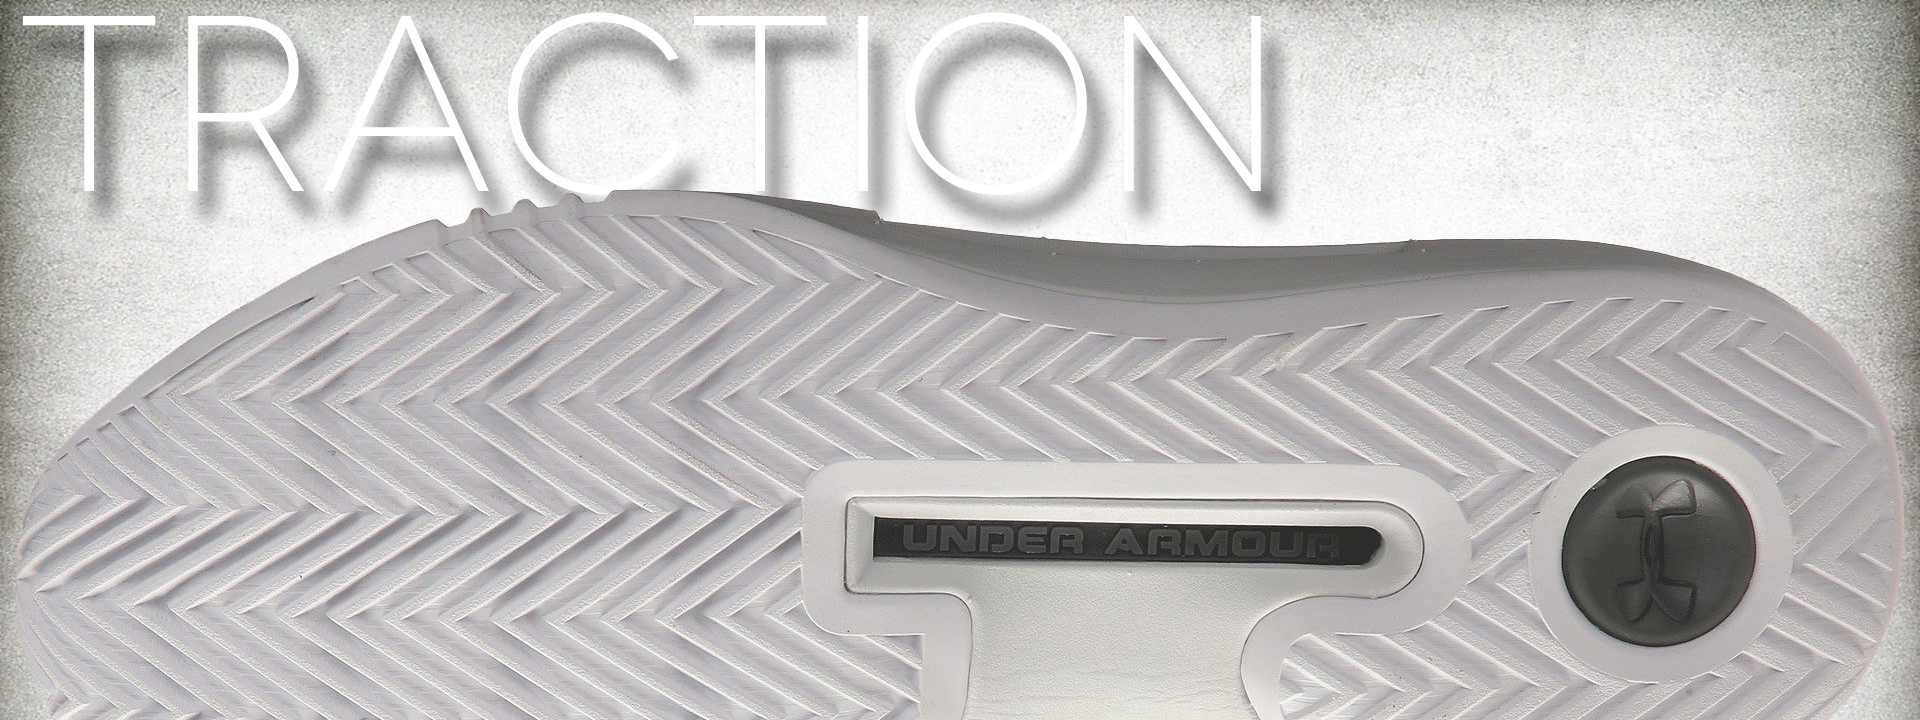 Under Armour Heat Seeker Performance Review traction